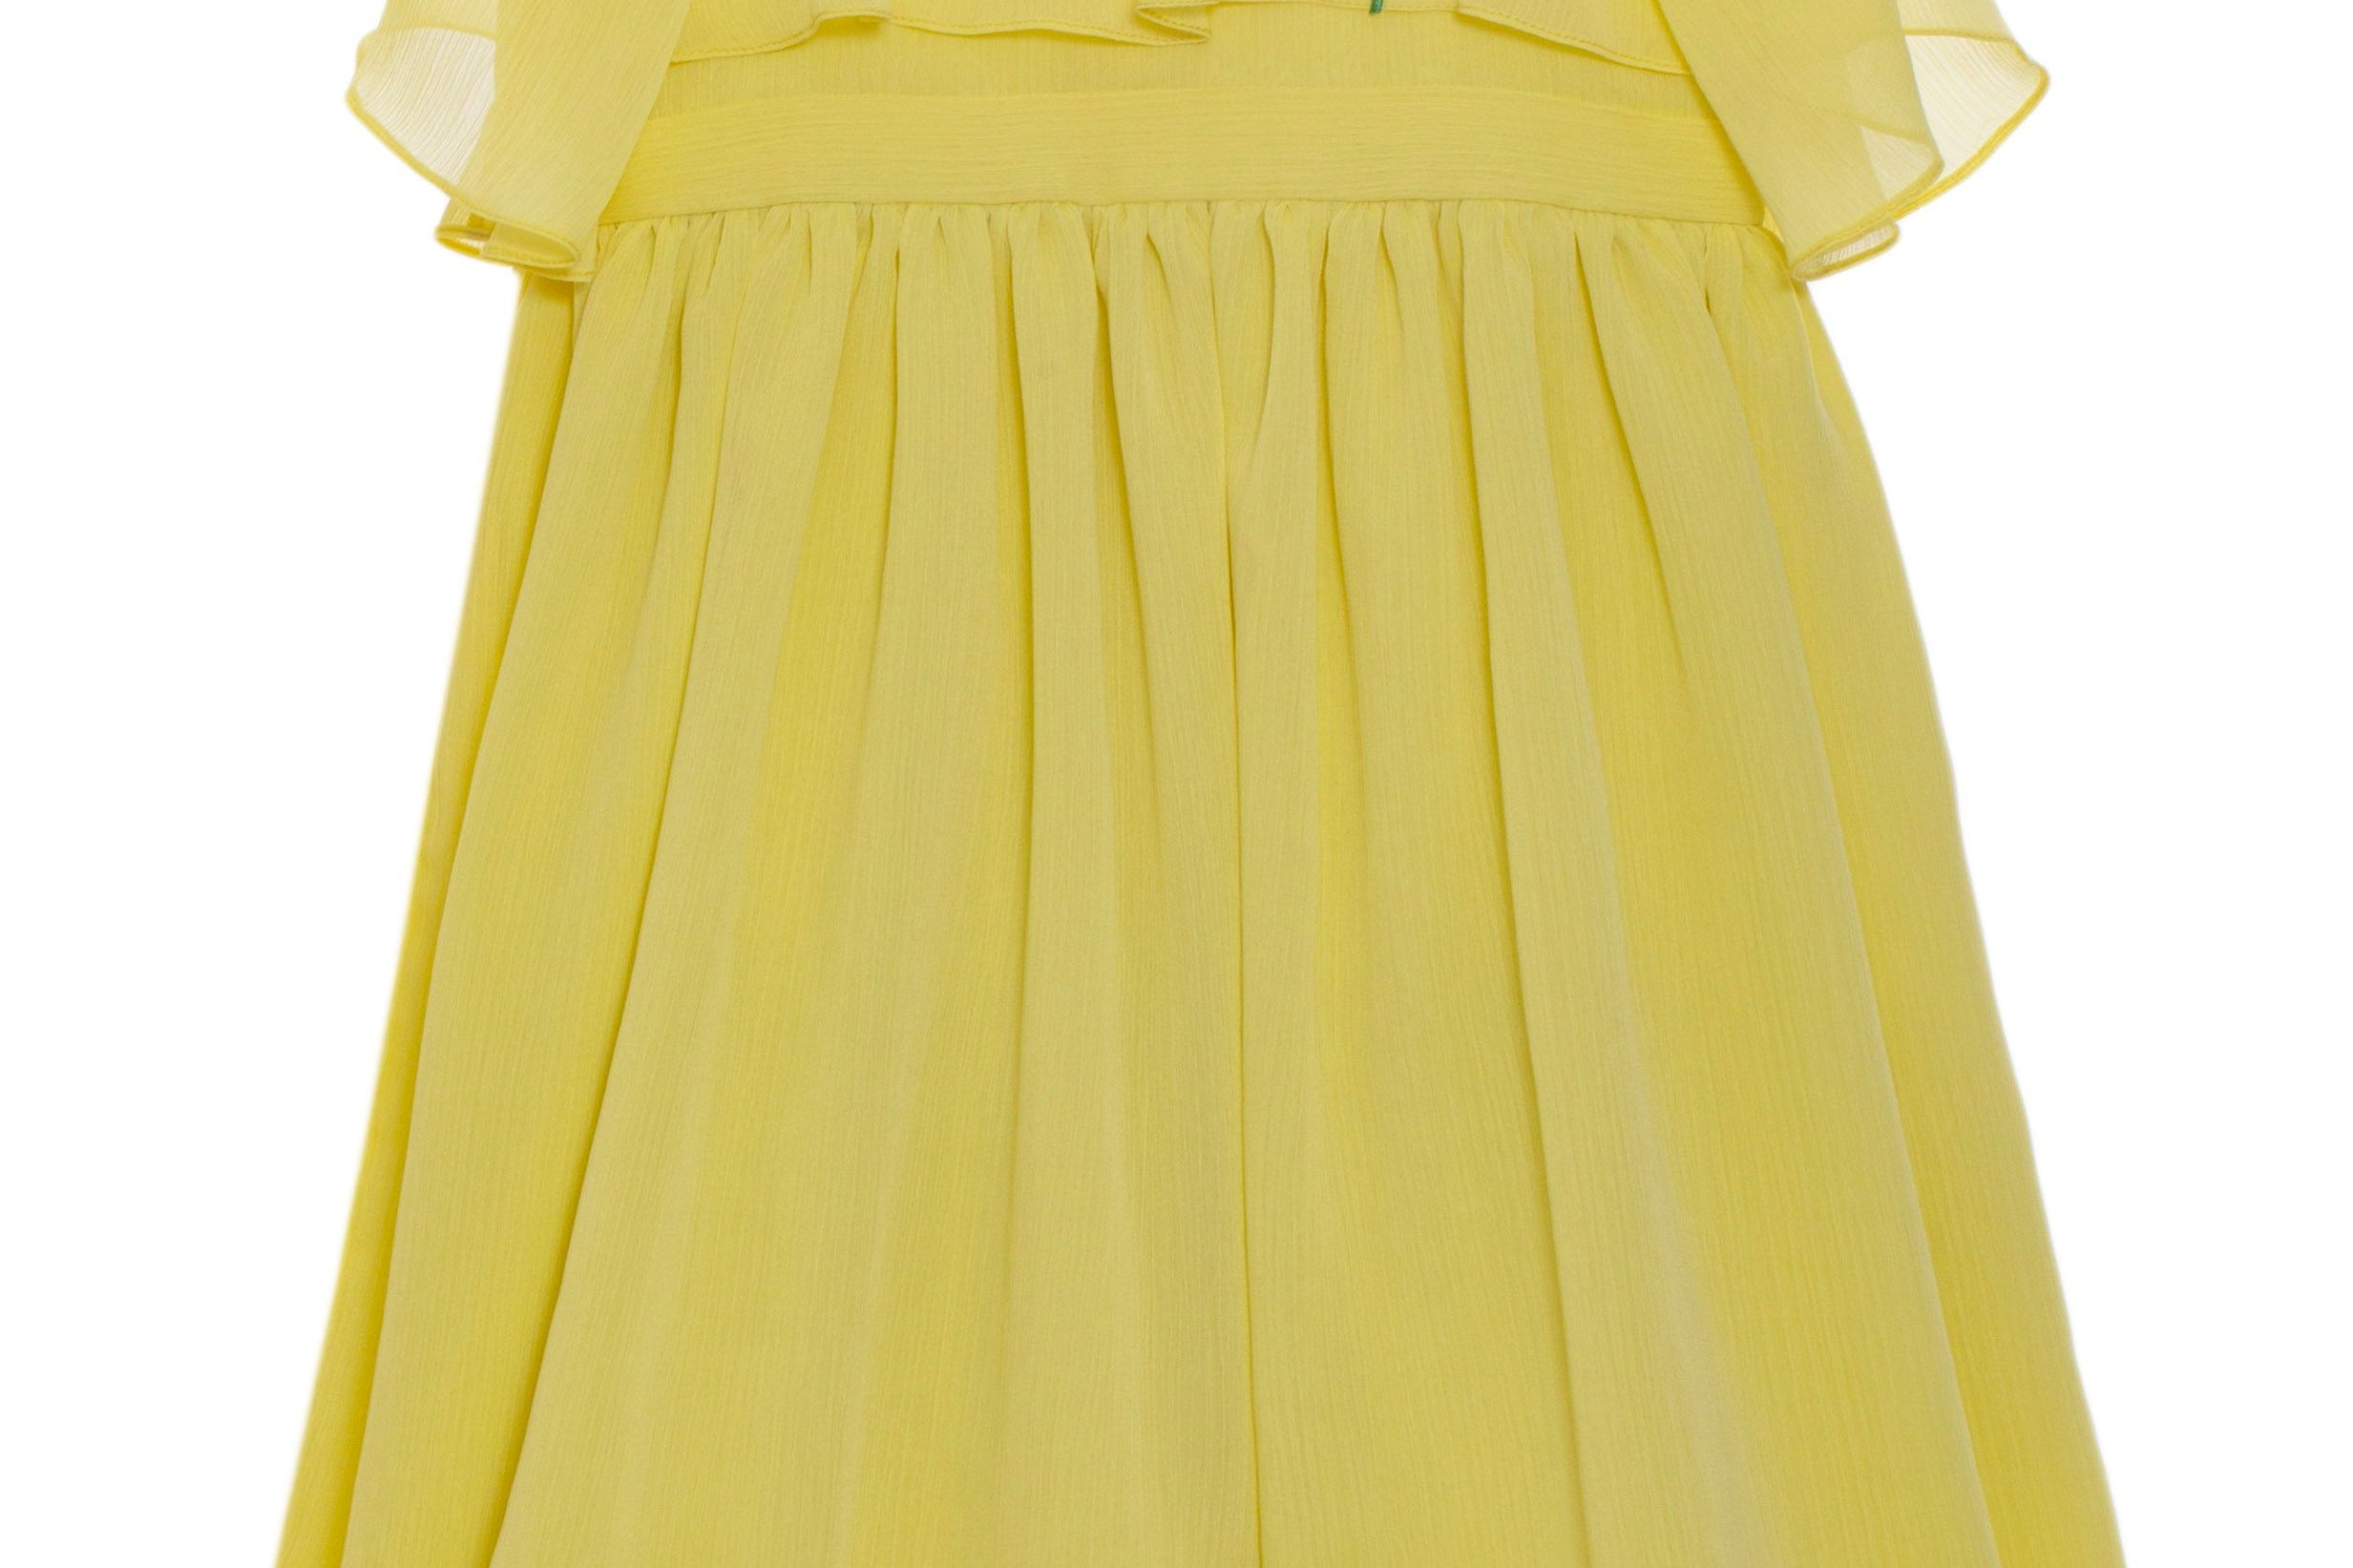 flare chiffon dress in yellow with pink floral applique on the chest and fluffer sleeves